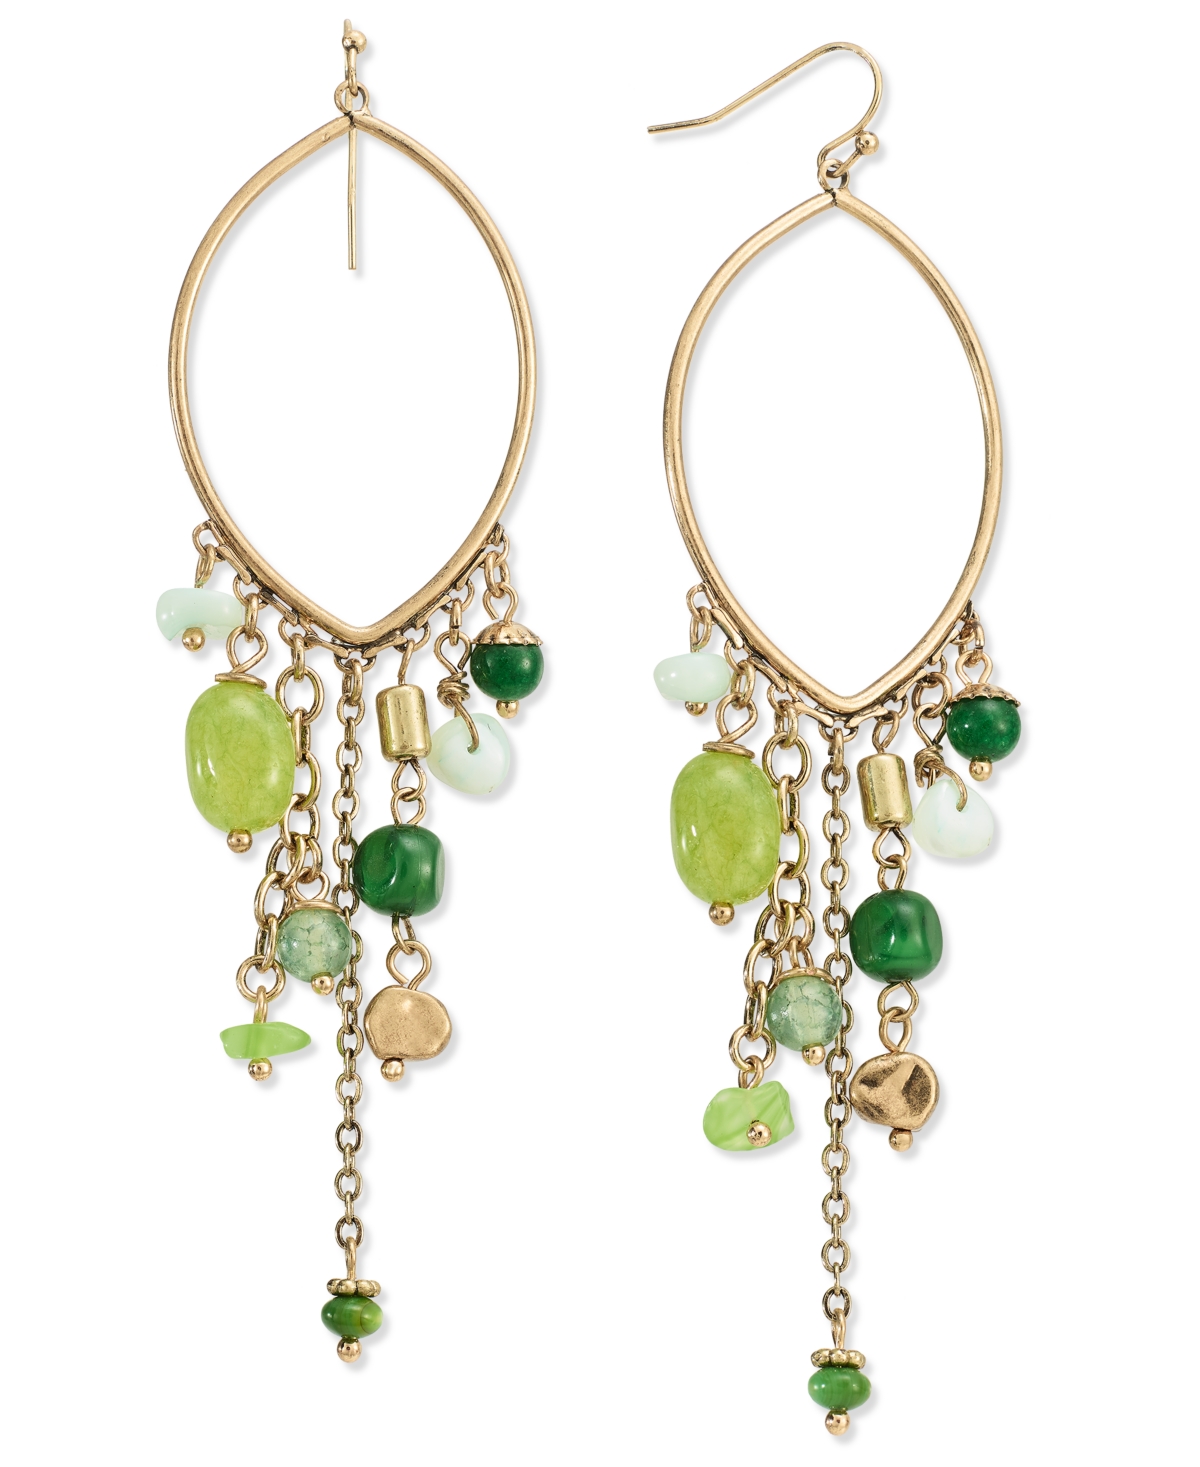 Mixed Gemstone Fringe Open Oval Statement Earrings, Created for Macy's - Green